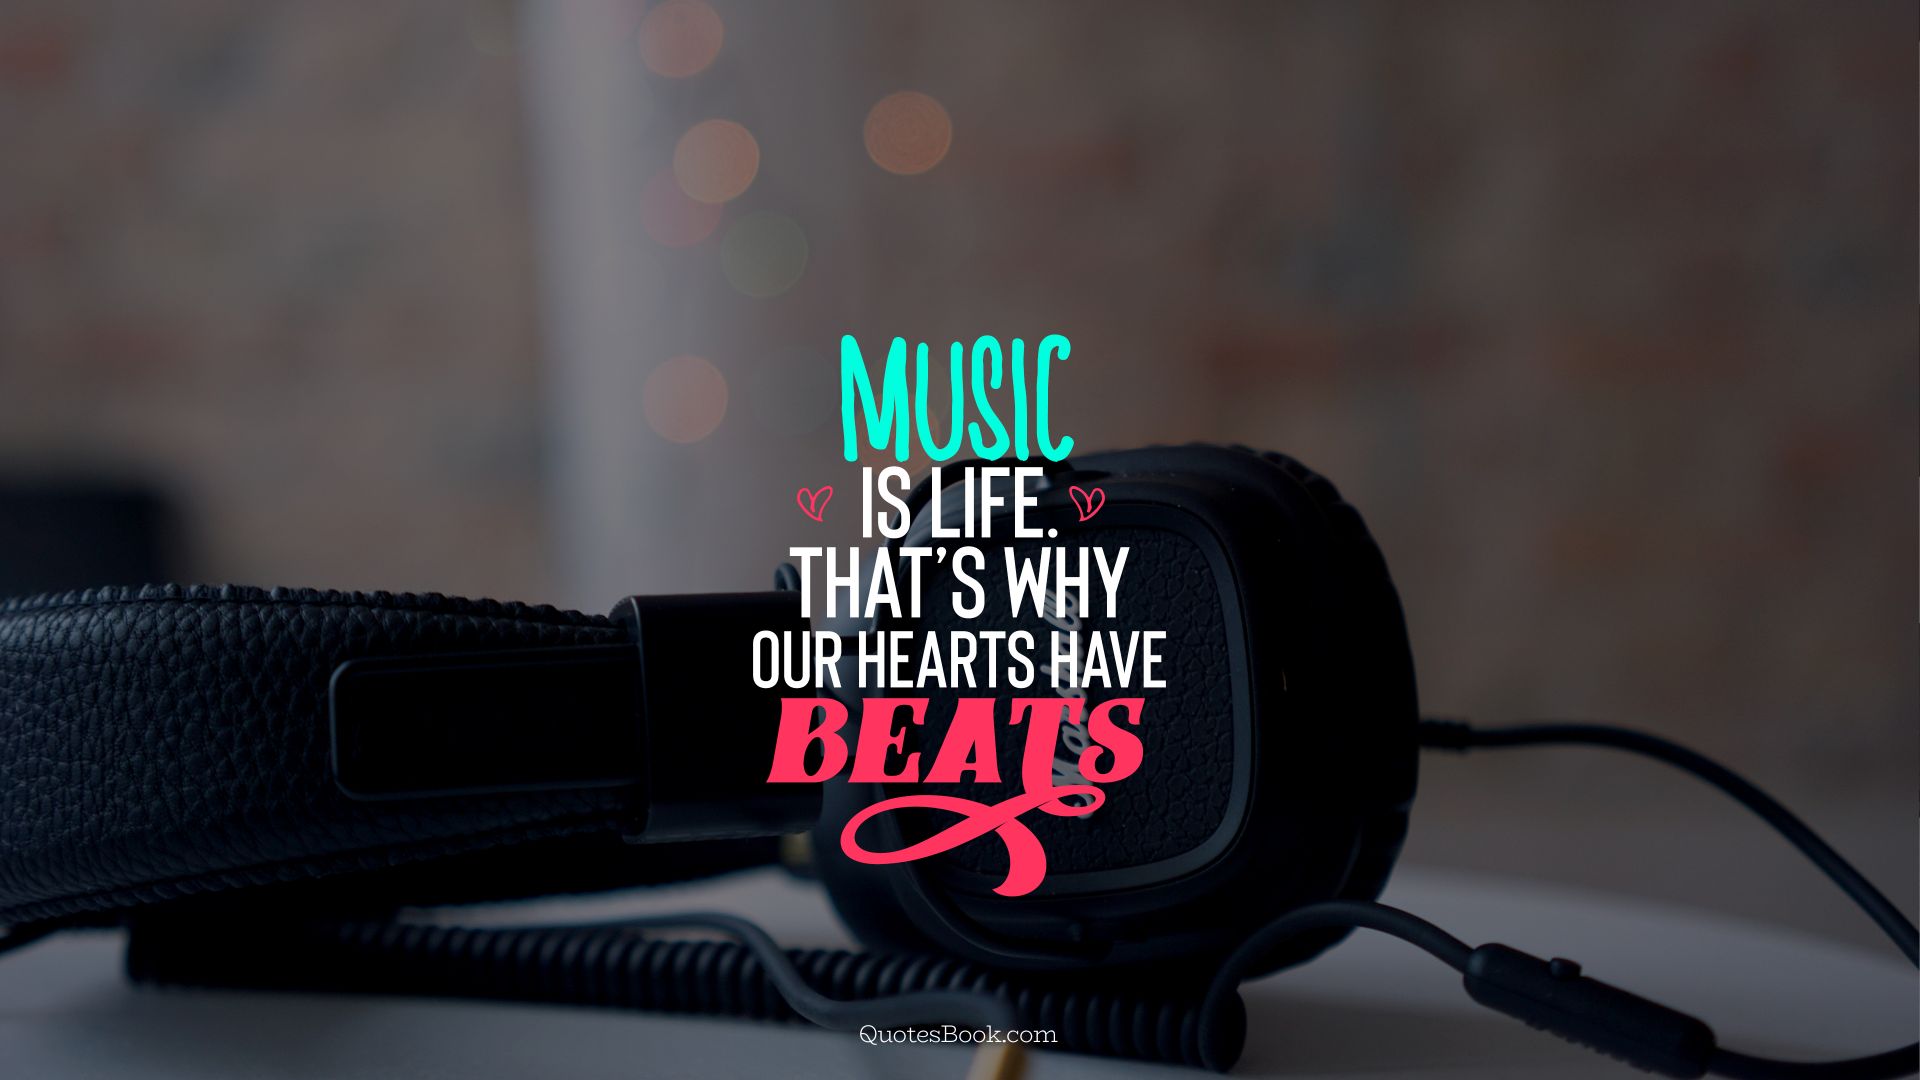 Music is life. That's why our hearts have beats